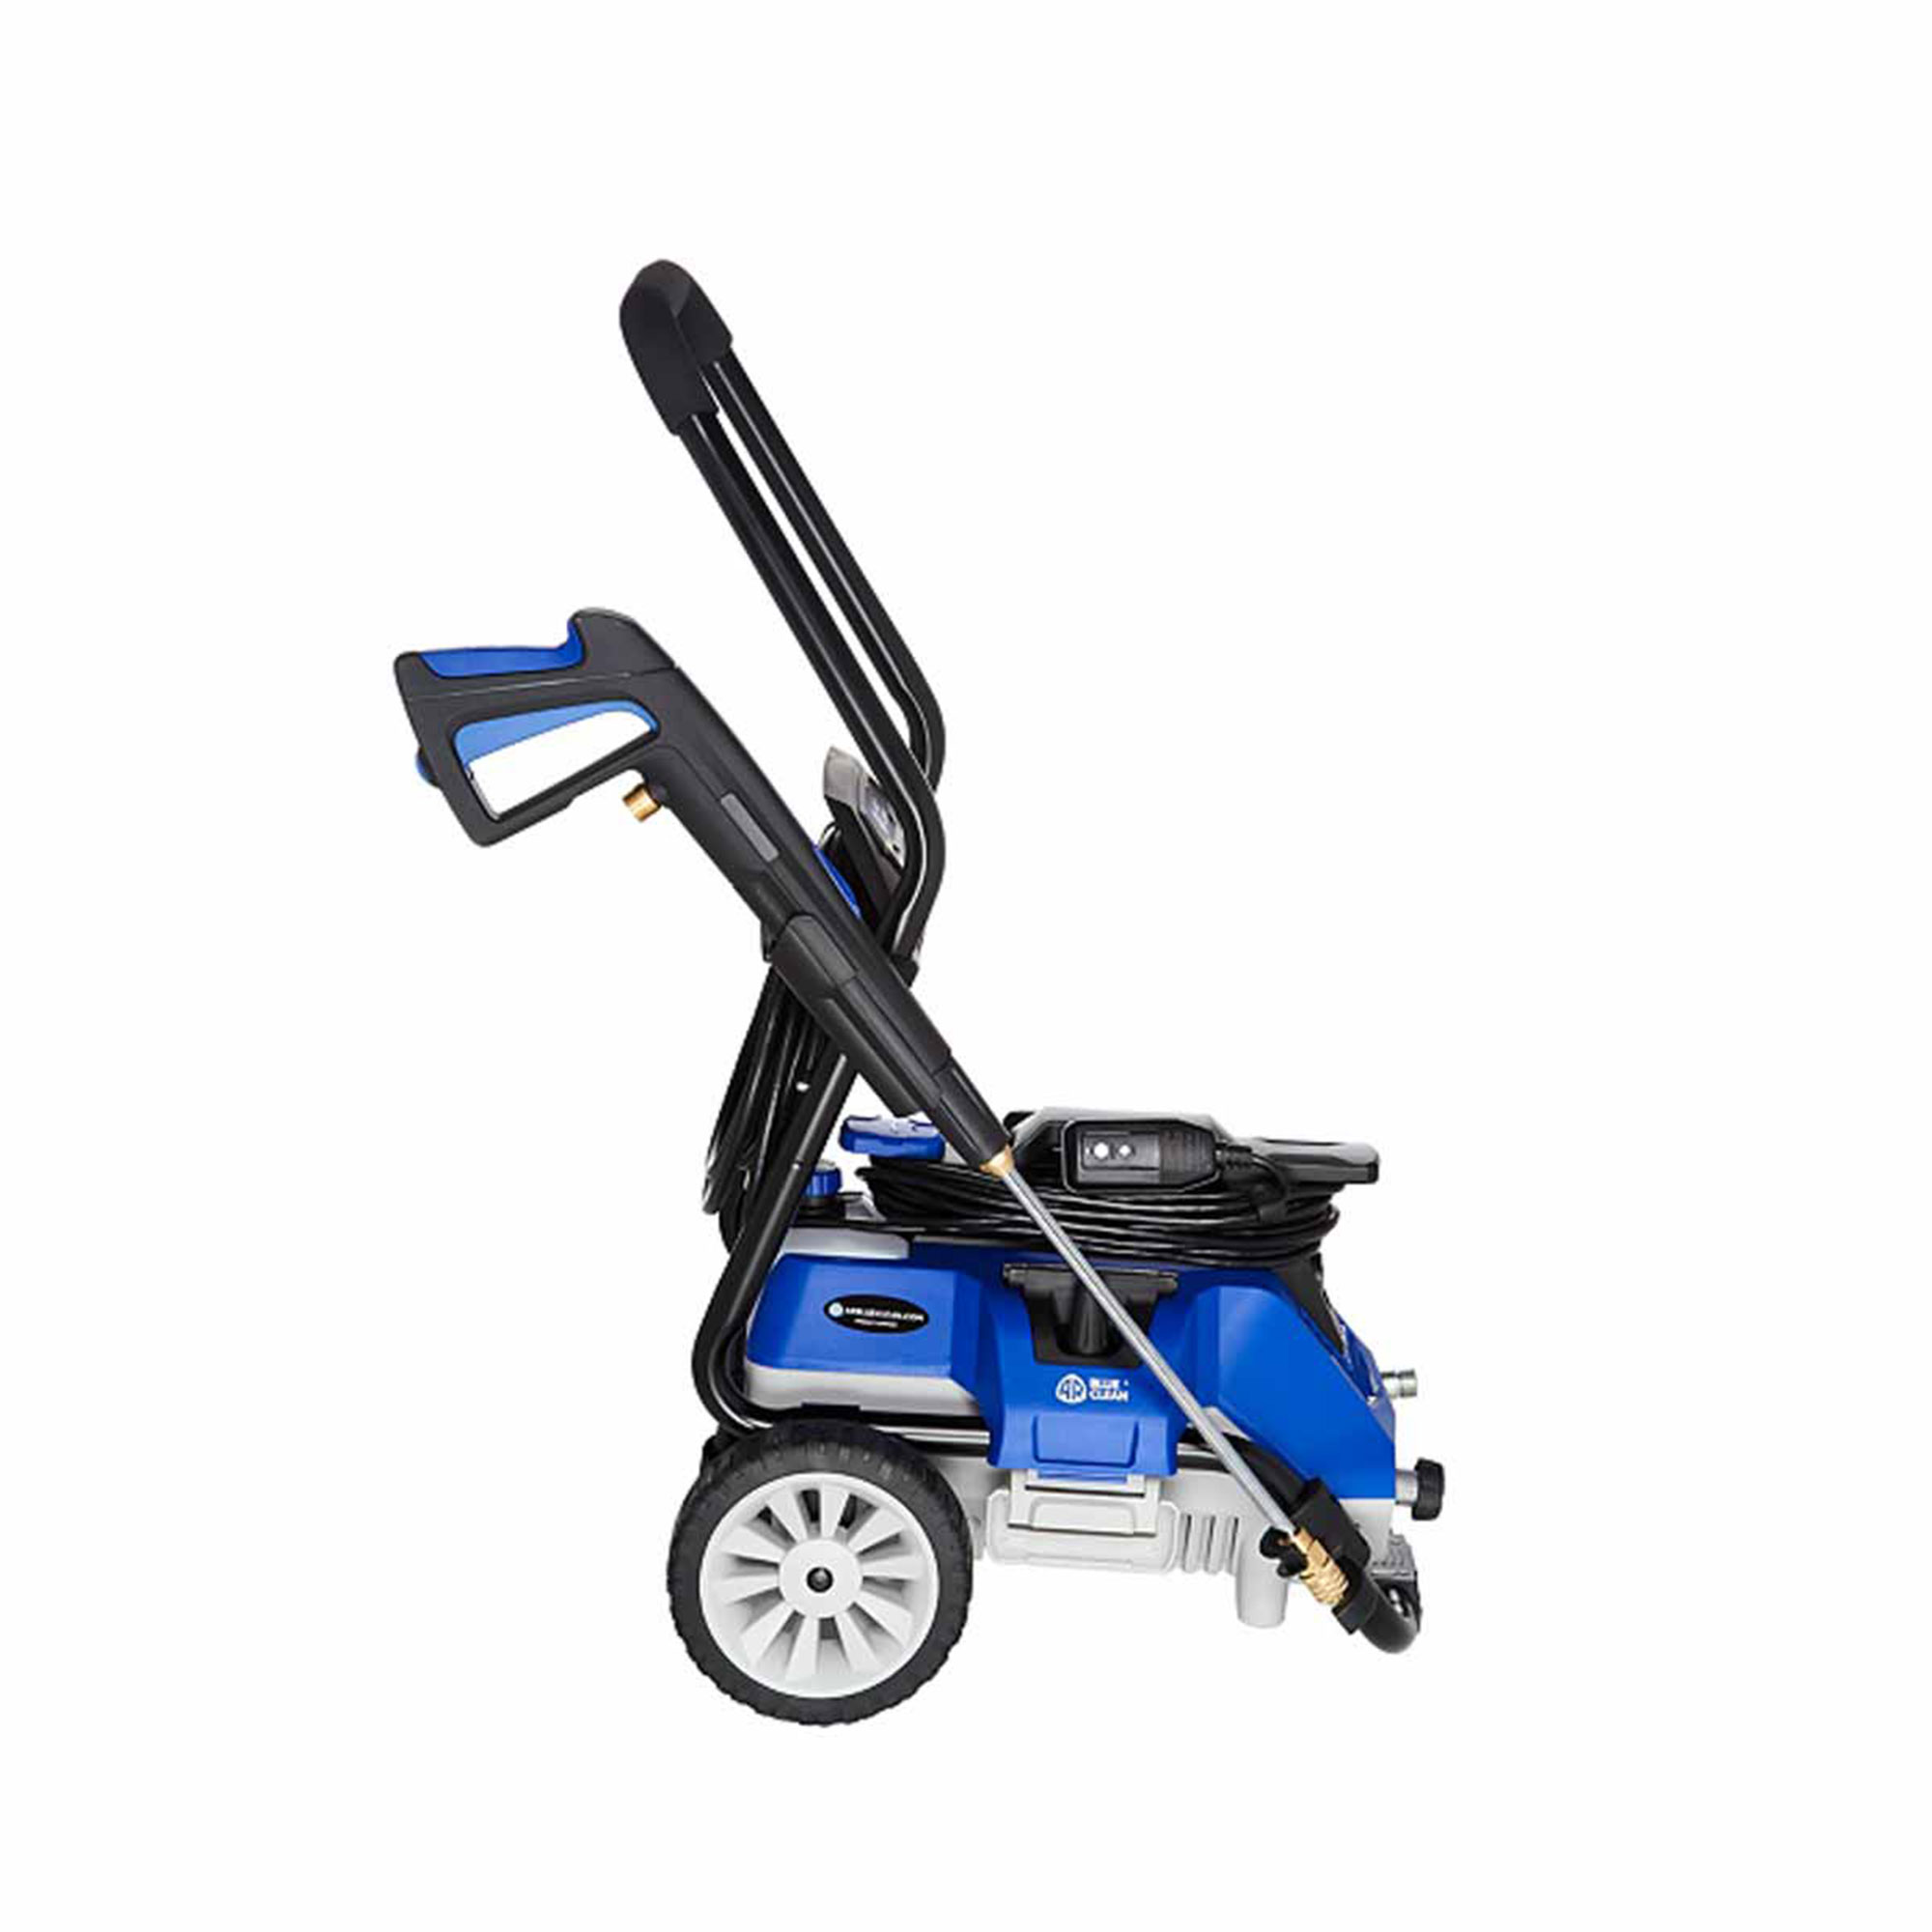 AR Blue Clean AR2N1 2 in 1 2,050 PSI 120 Volt Electric Pressure Washer, Blue - image 2 of 4